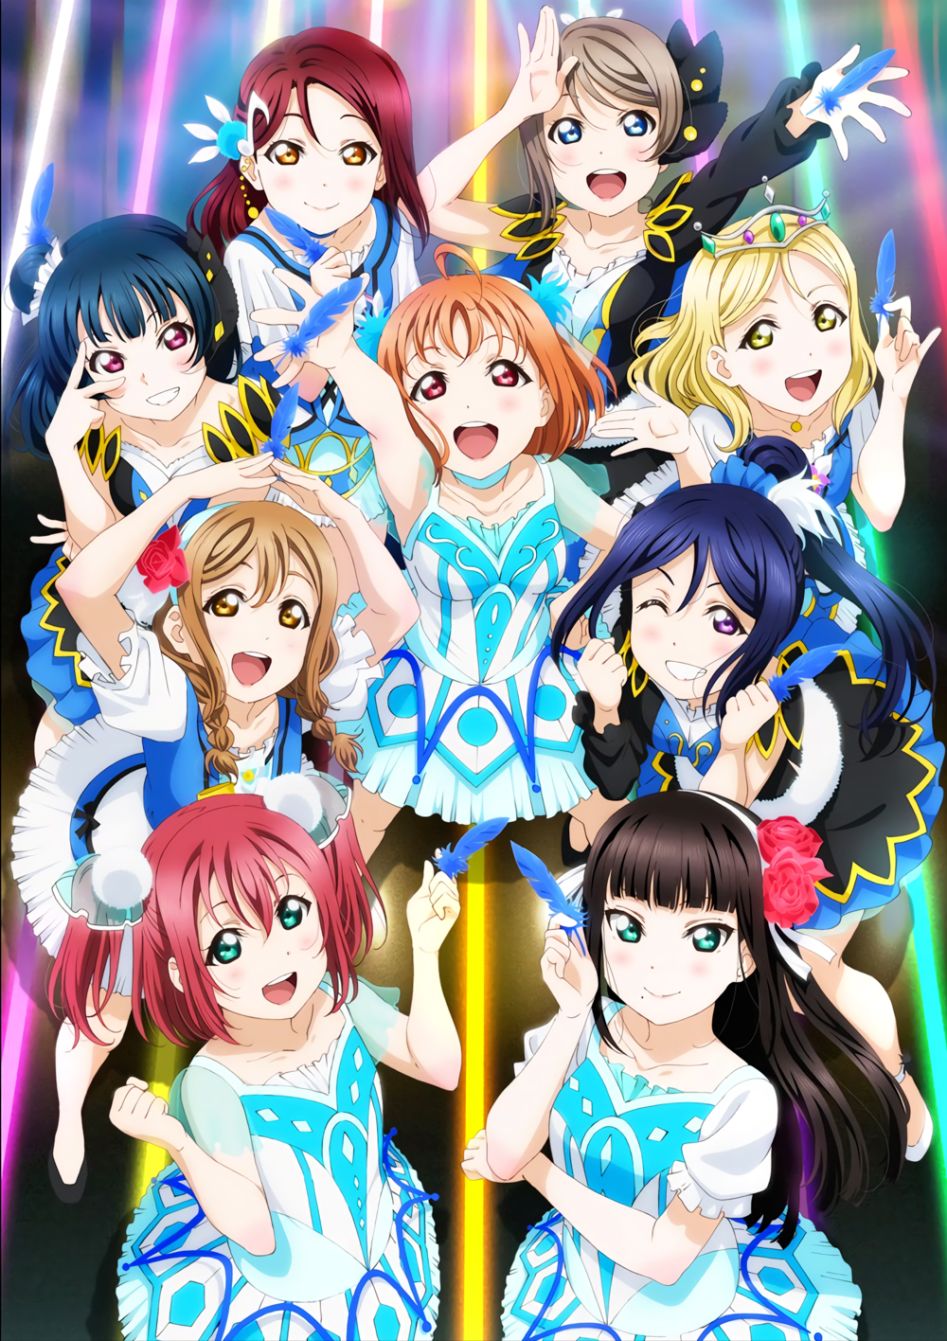 Aqours_3rd_LoveLive!_Tour_～WONDERFUL_STORIES～_Poster.png